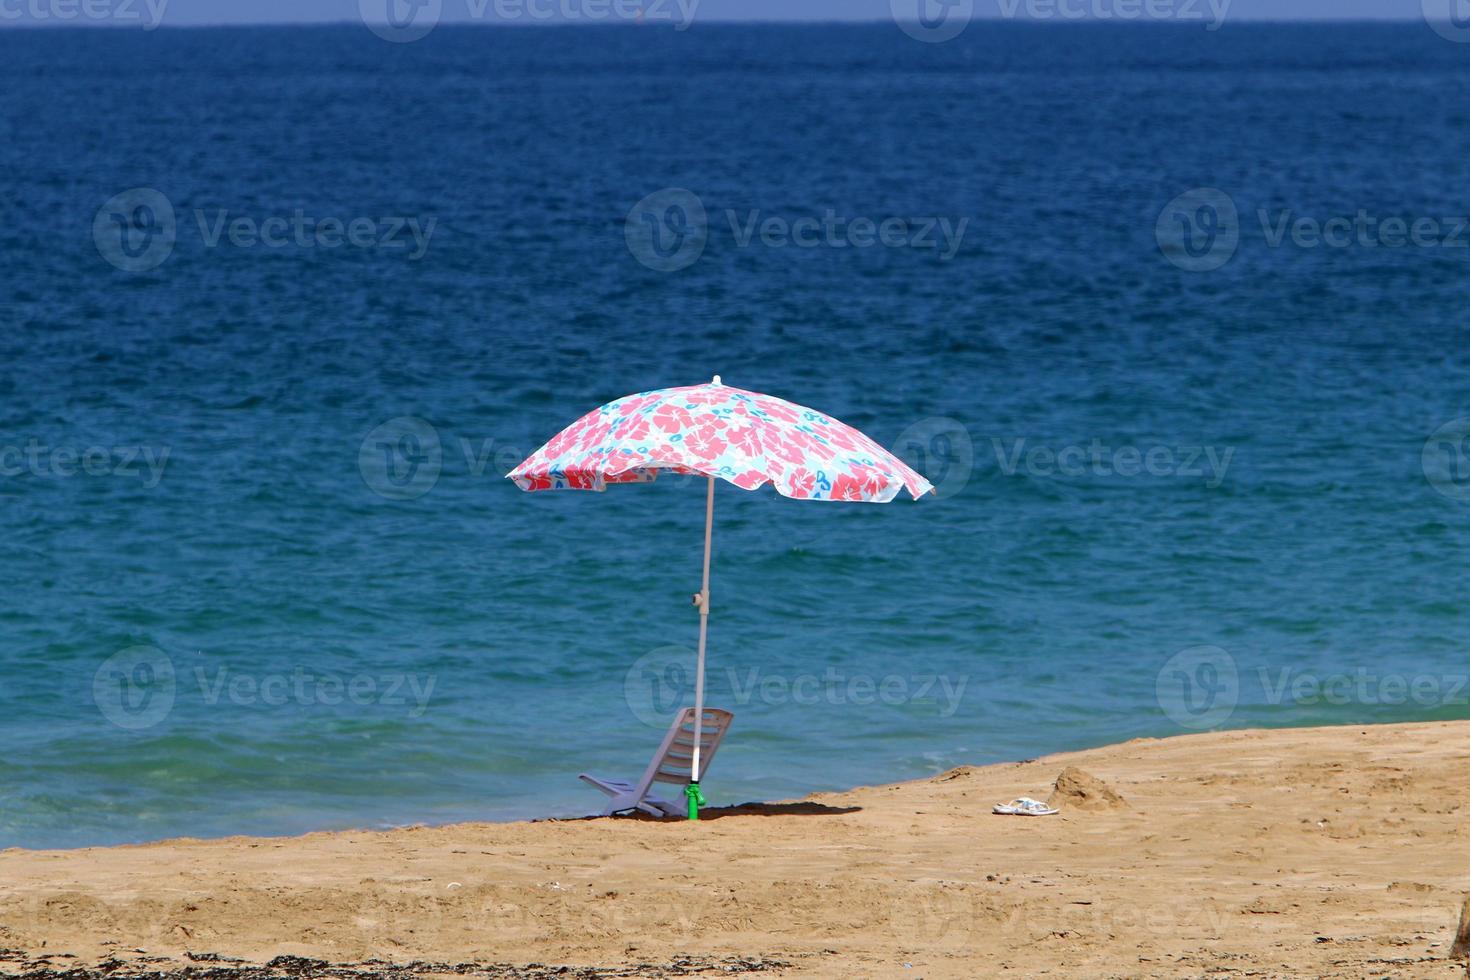 Umbrella for shelter from the sun on the city beach. photo